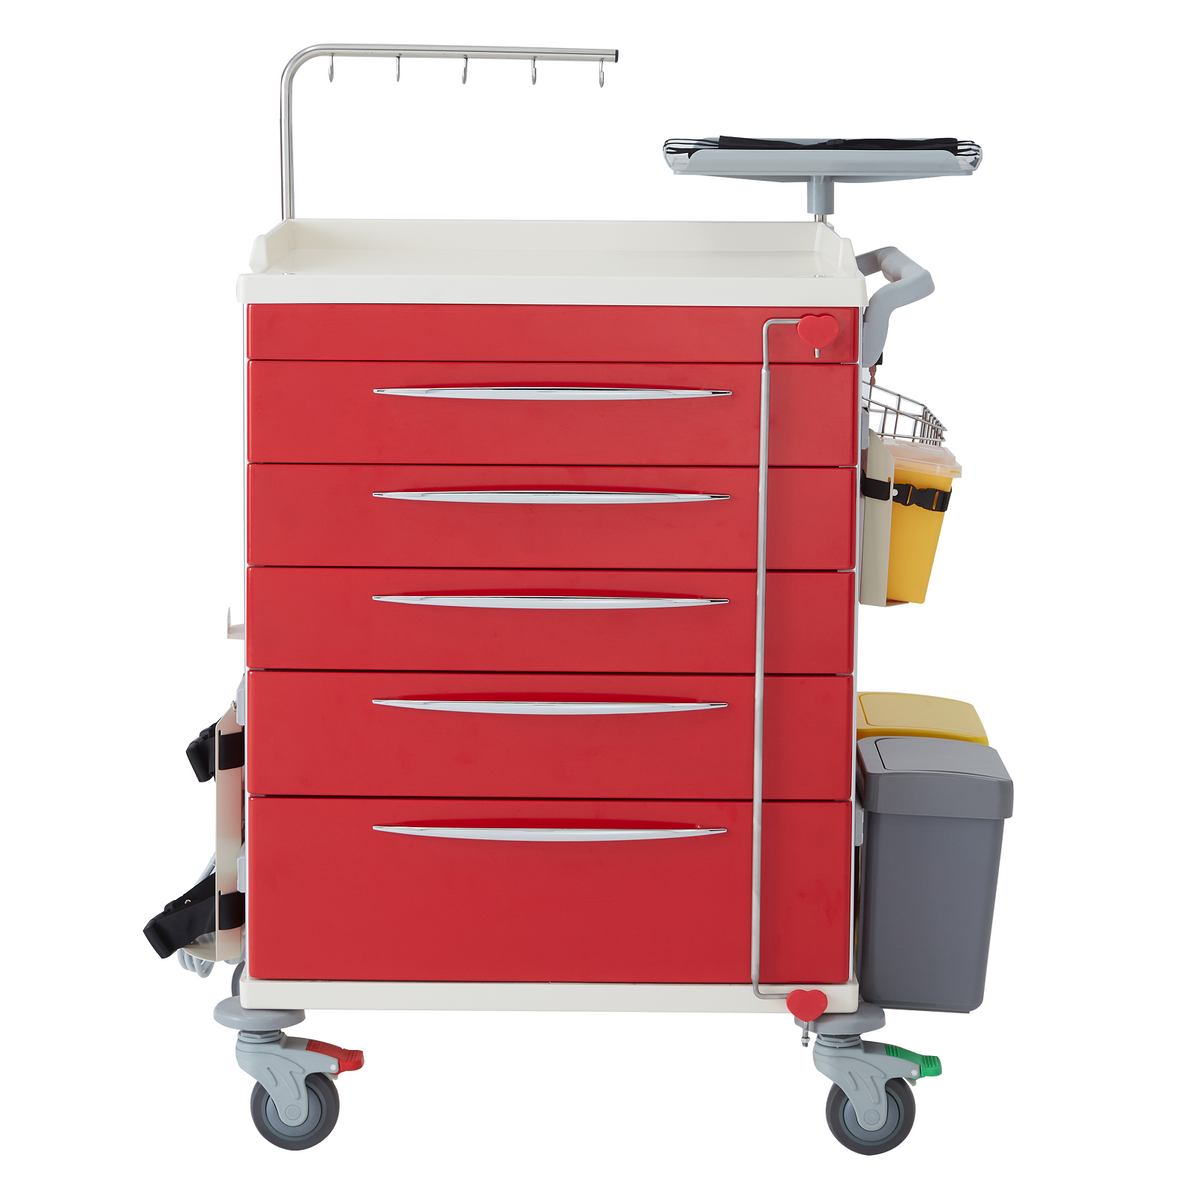 A rugged portable emergency trolley constructed with steel &amp;amp; ABS. Along with a heavy load rating and full set of accessories included it&#39;s a best seller.